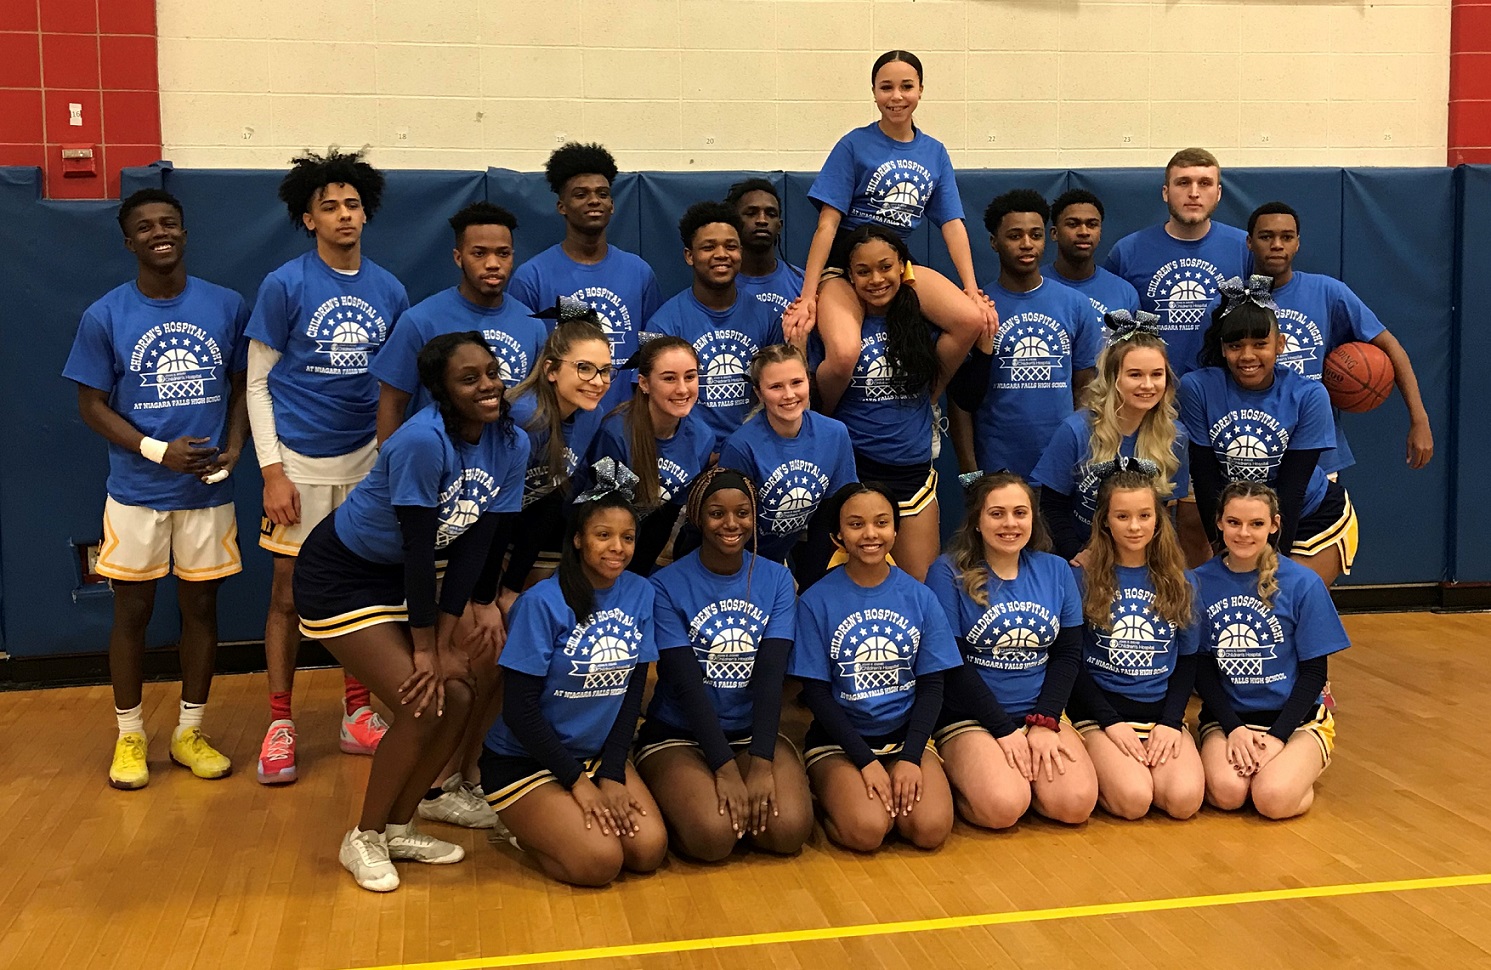 Niagara Falls High School cheerleaders and basketball players pose before the game in the Children's Hospital Night-themed blue T-shirts. (Photo by David Yarger) 